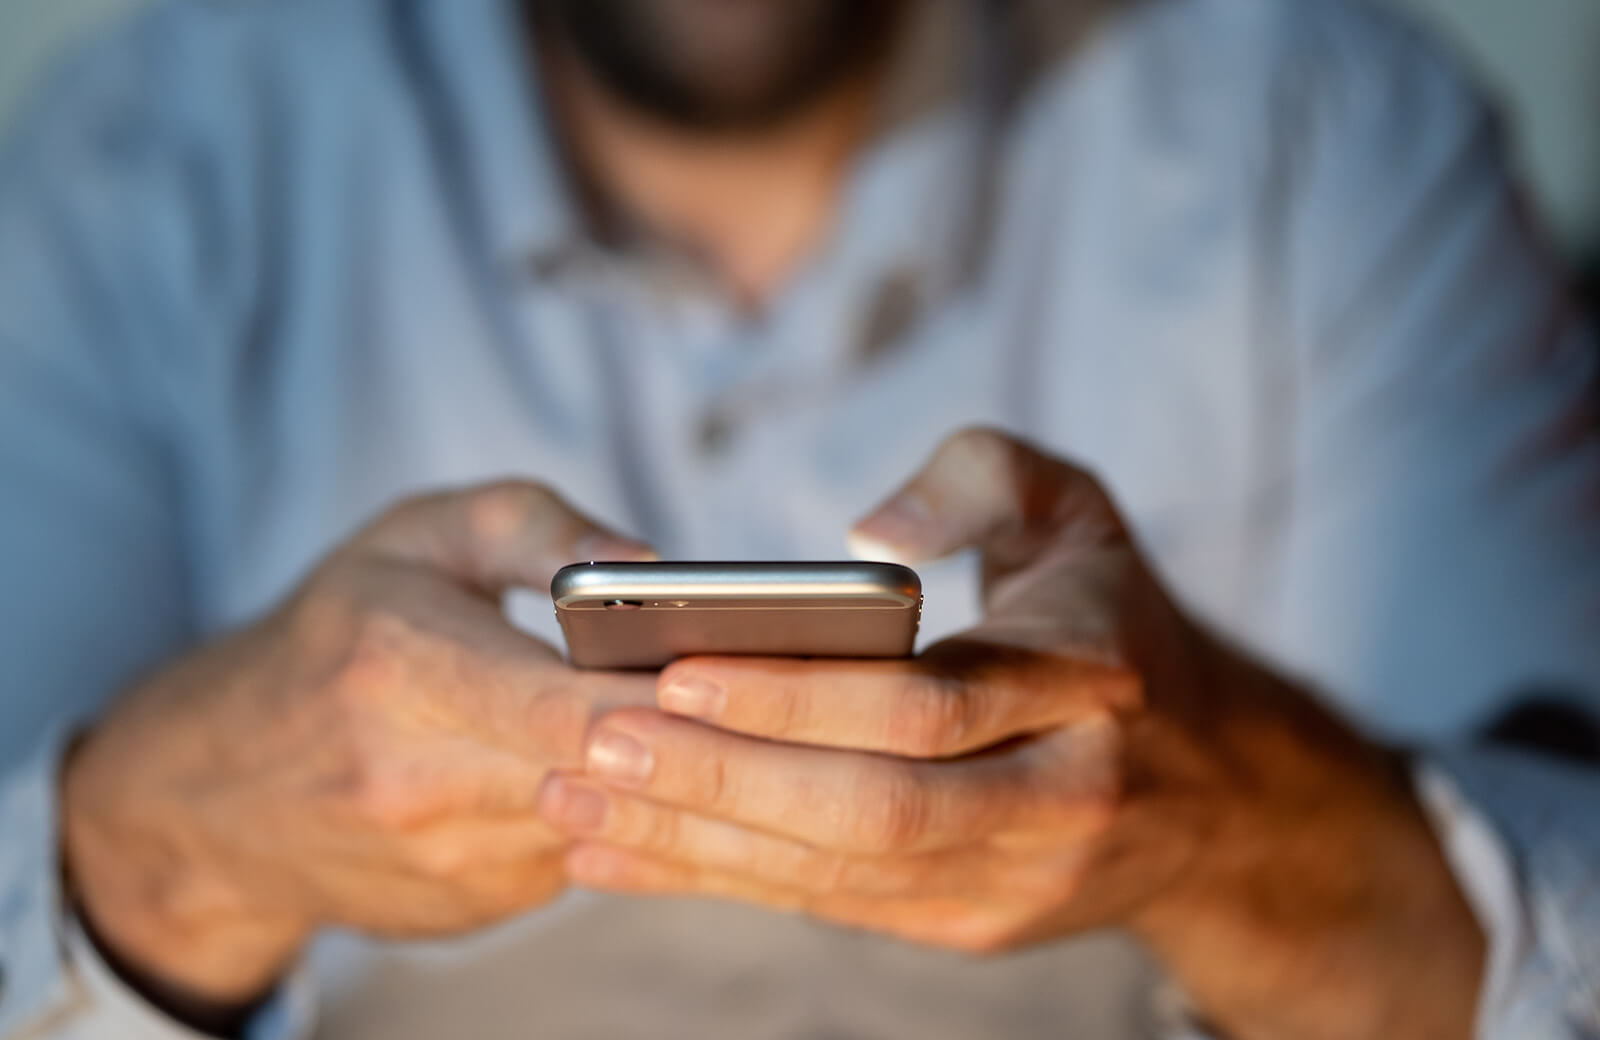 A man uses his cell phone. Want to look into mental health resources in Evanston, IL but do not know where to start? Speak with a therapist at Evanston Counseling today!